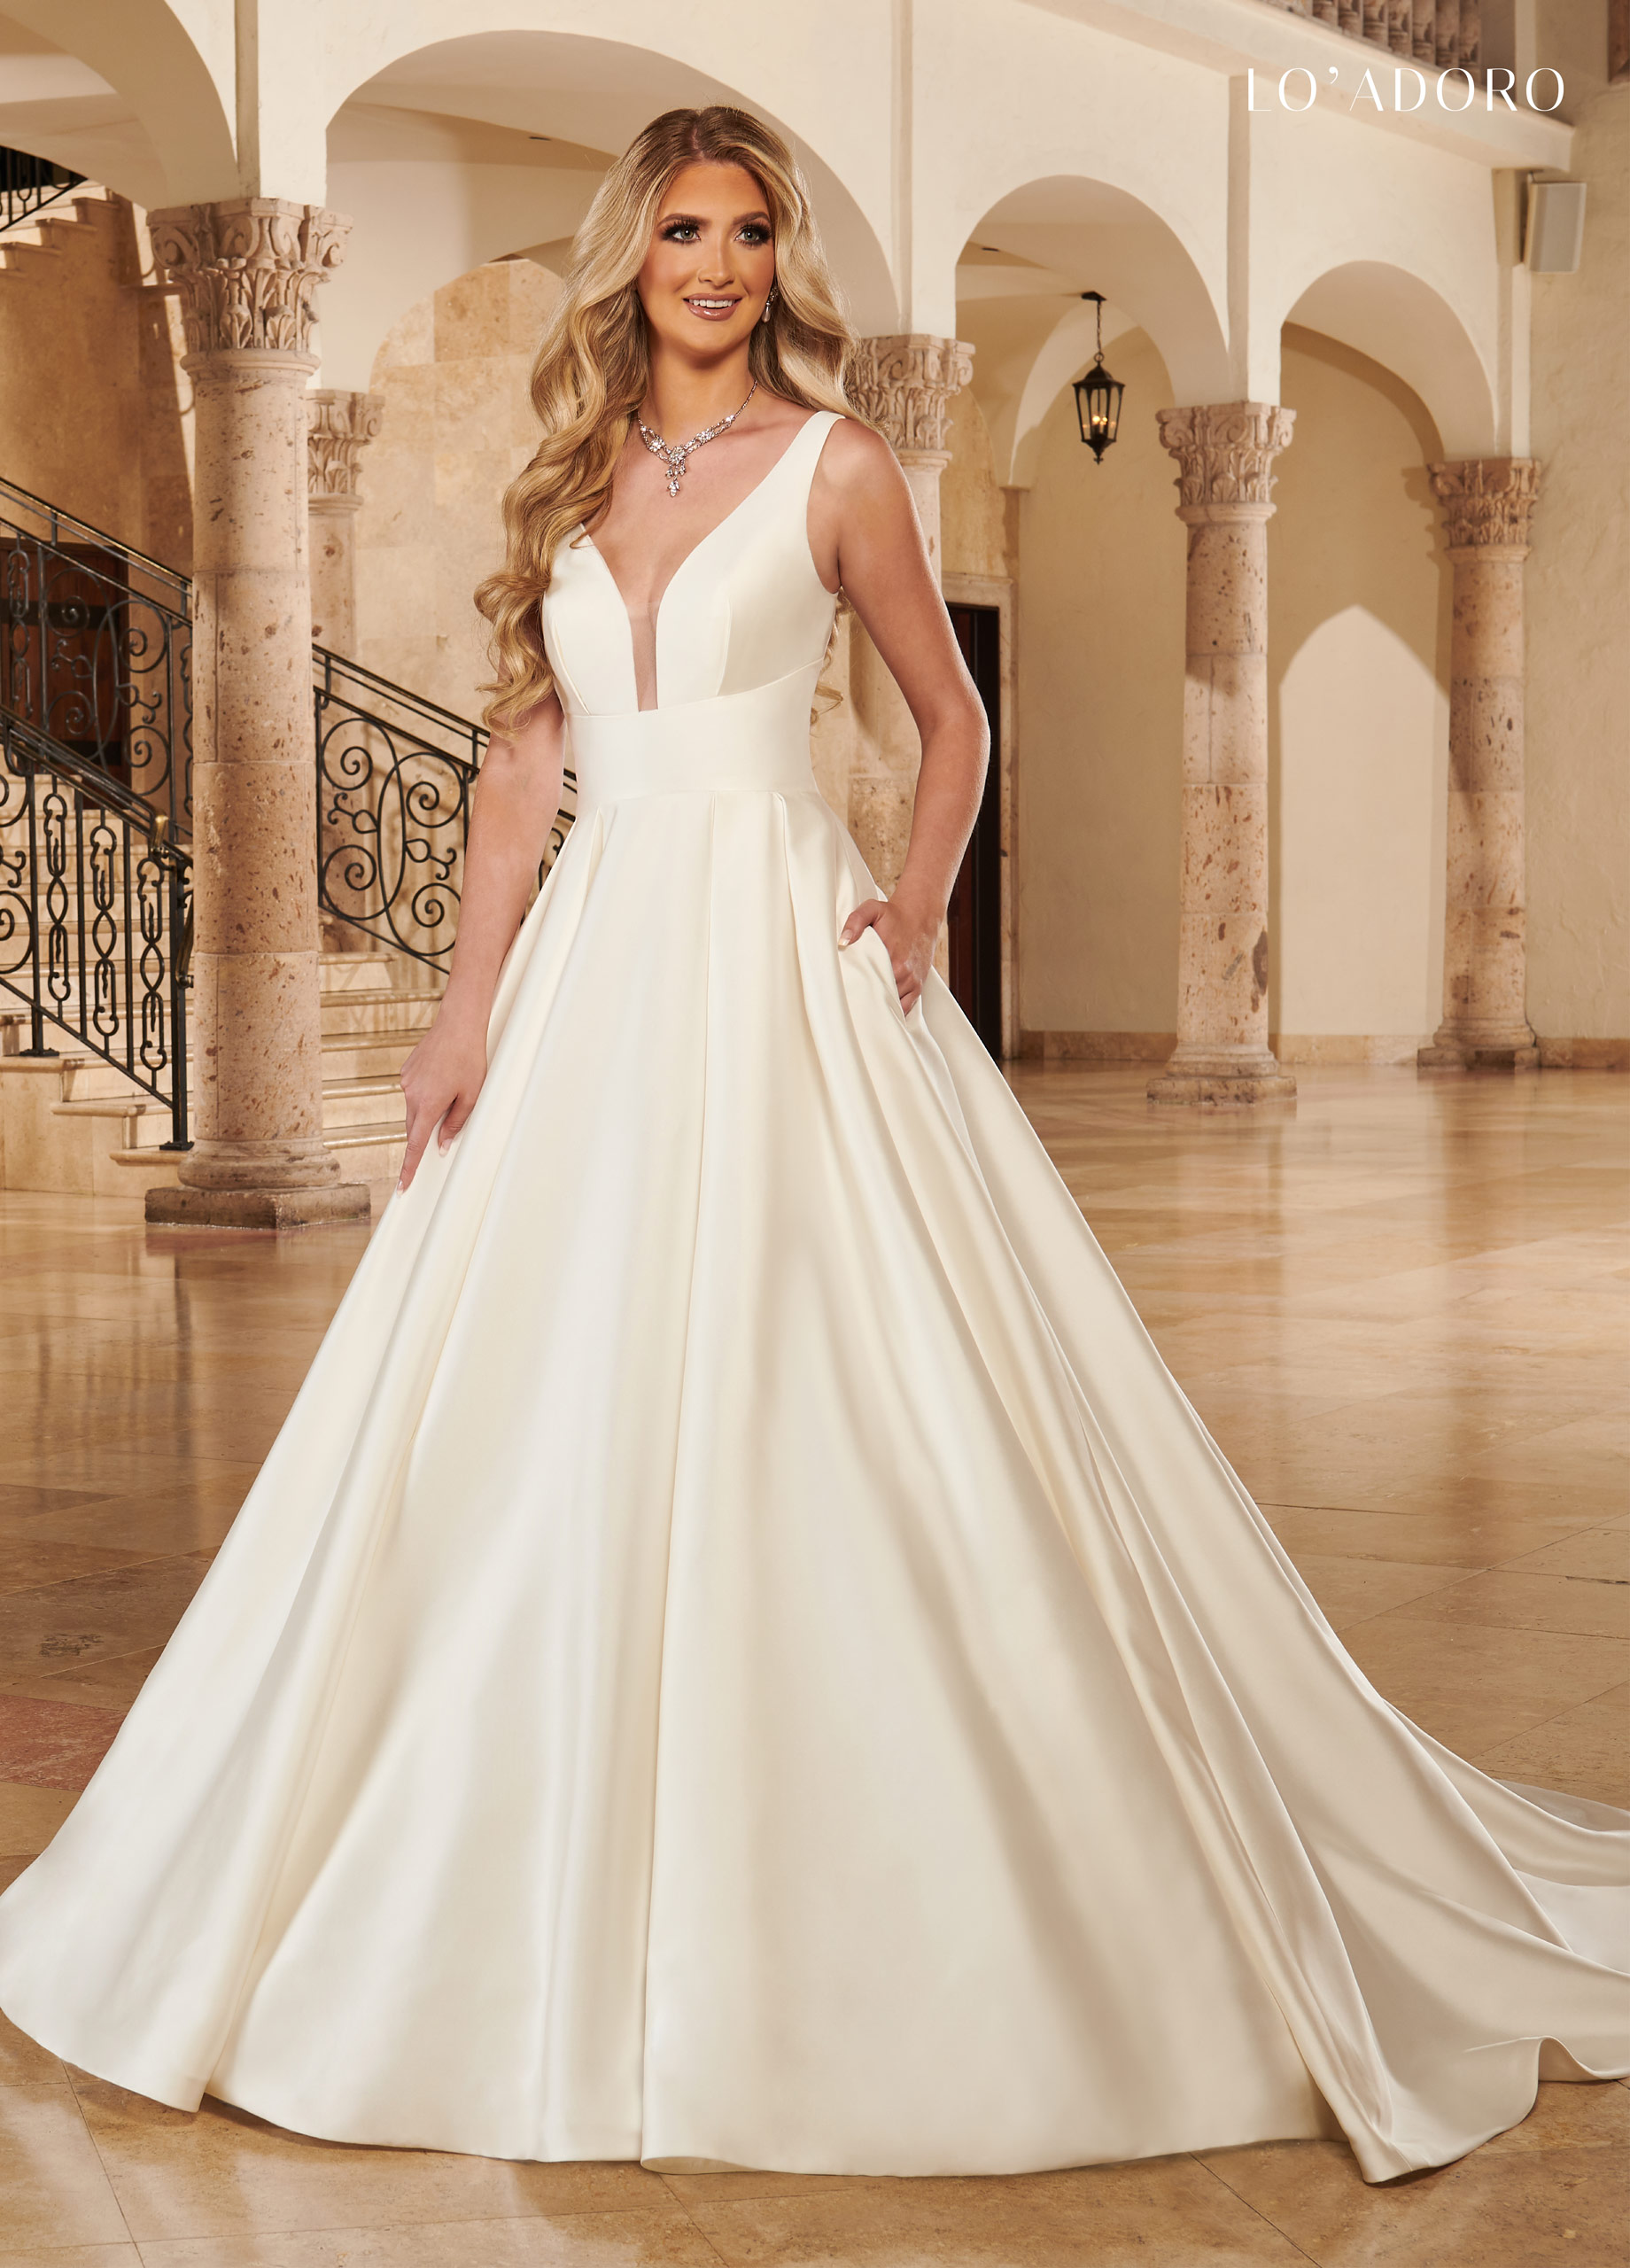 V-Neck Ball Gowns Lo' Adoro Bridal in Ivory,White Color